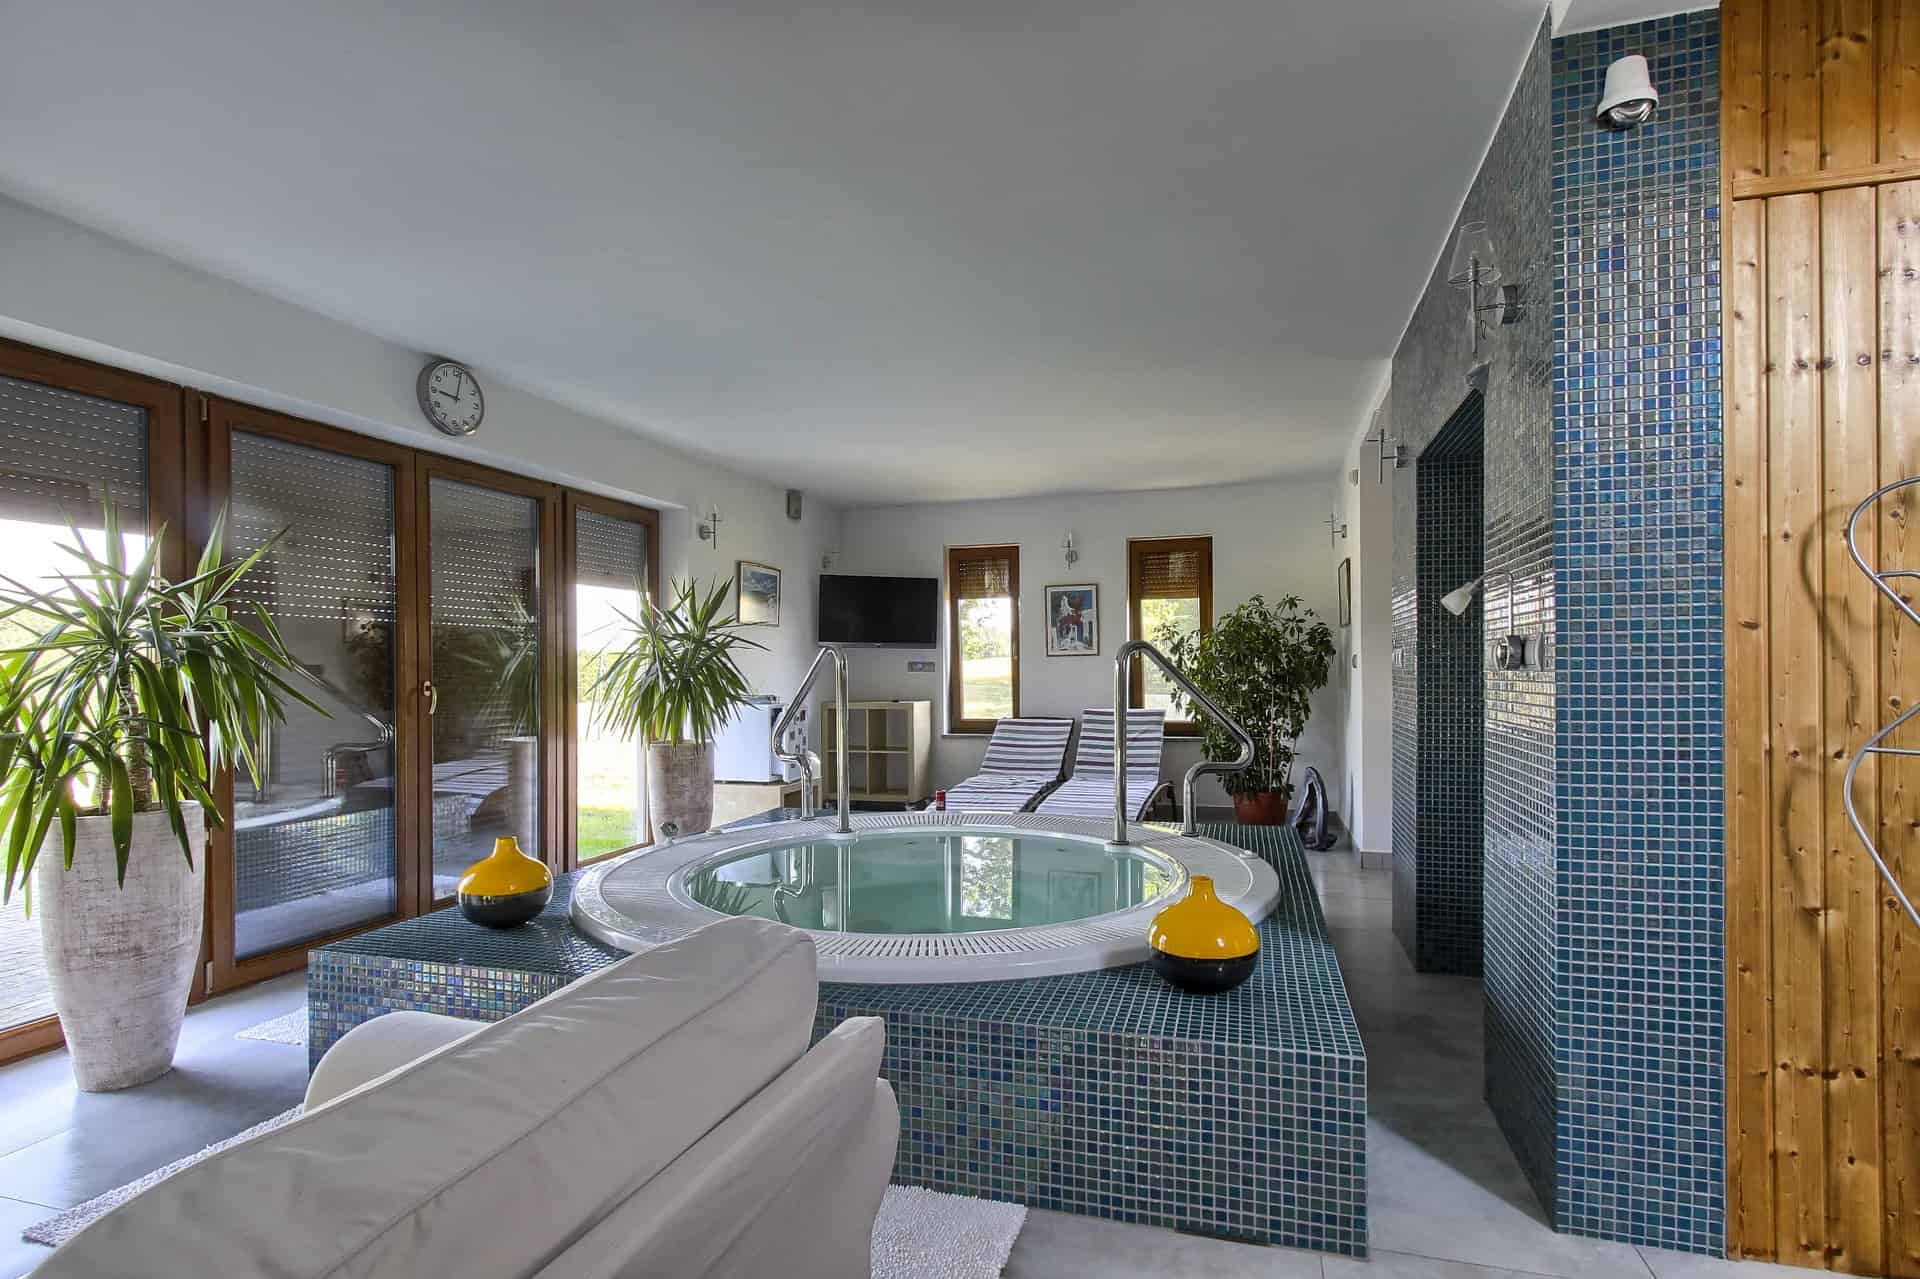 jacuzzi and relaxation zone - funaberia skop